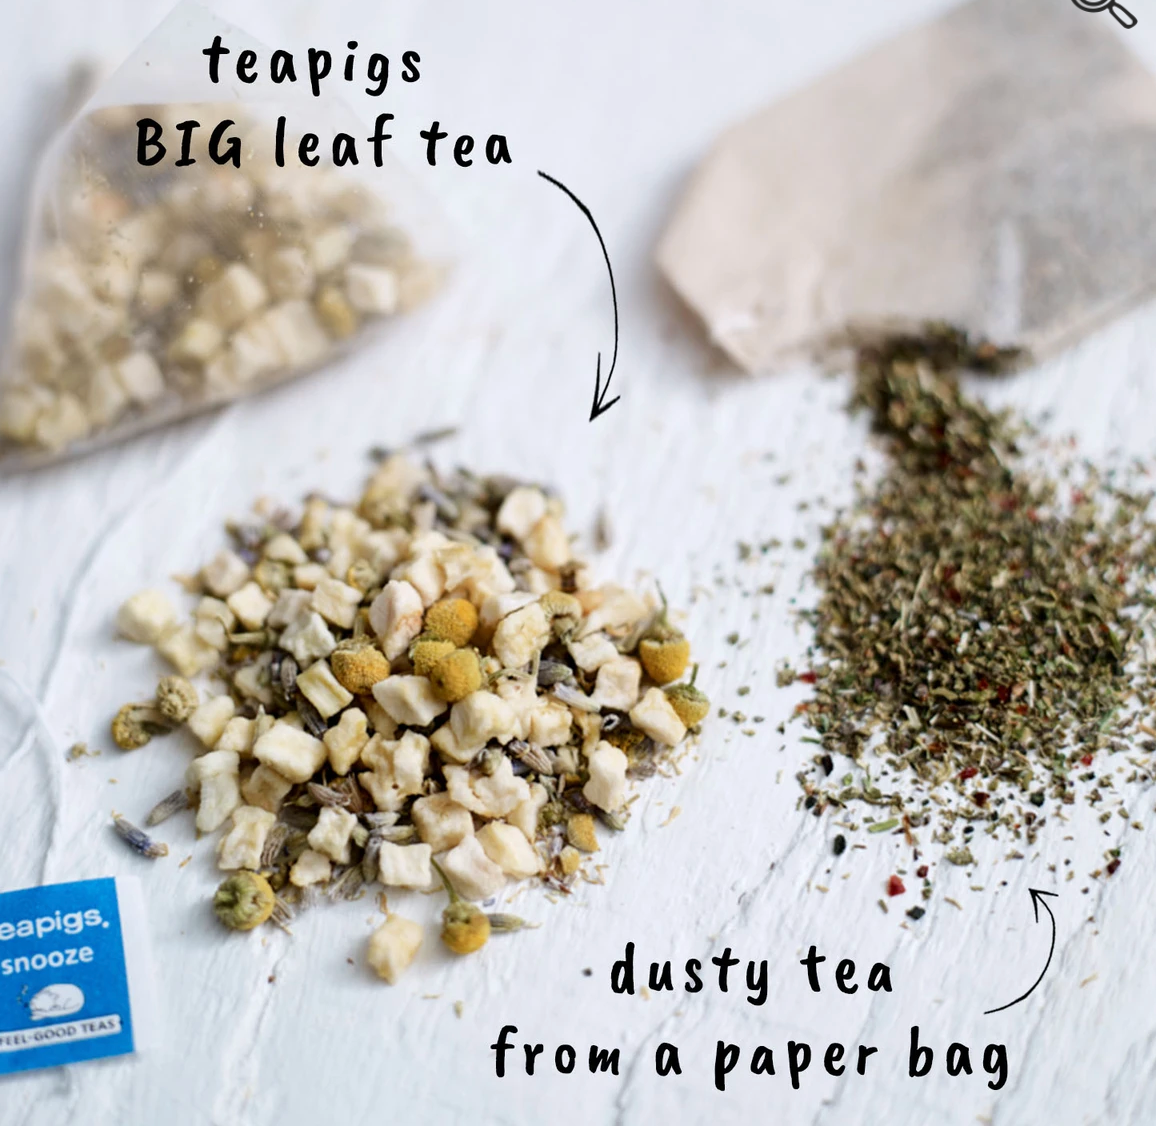 Pictured are two piles of loose tea. One is unground and the other is ground. The unground tea has an arrow pointing at it with words that read "teapigs BIG leaf tea." The ground tea also has an arrow pointing toward it and the words "dusty tea from a paper bag."